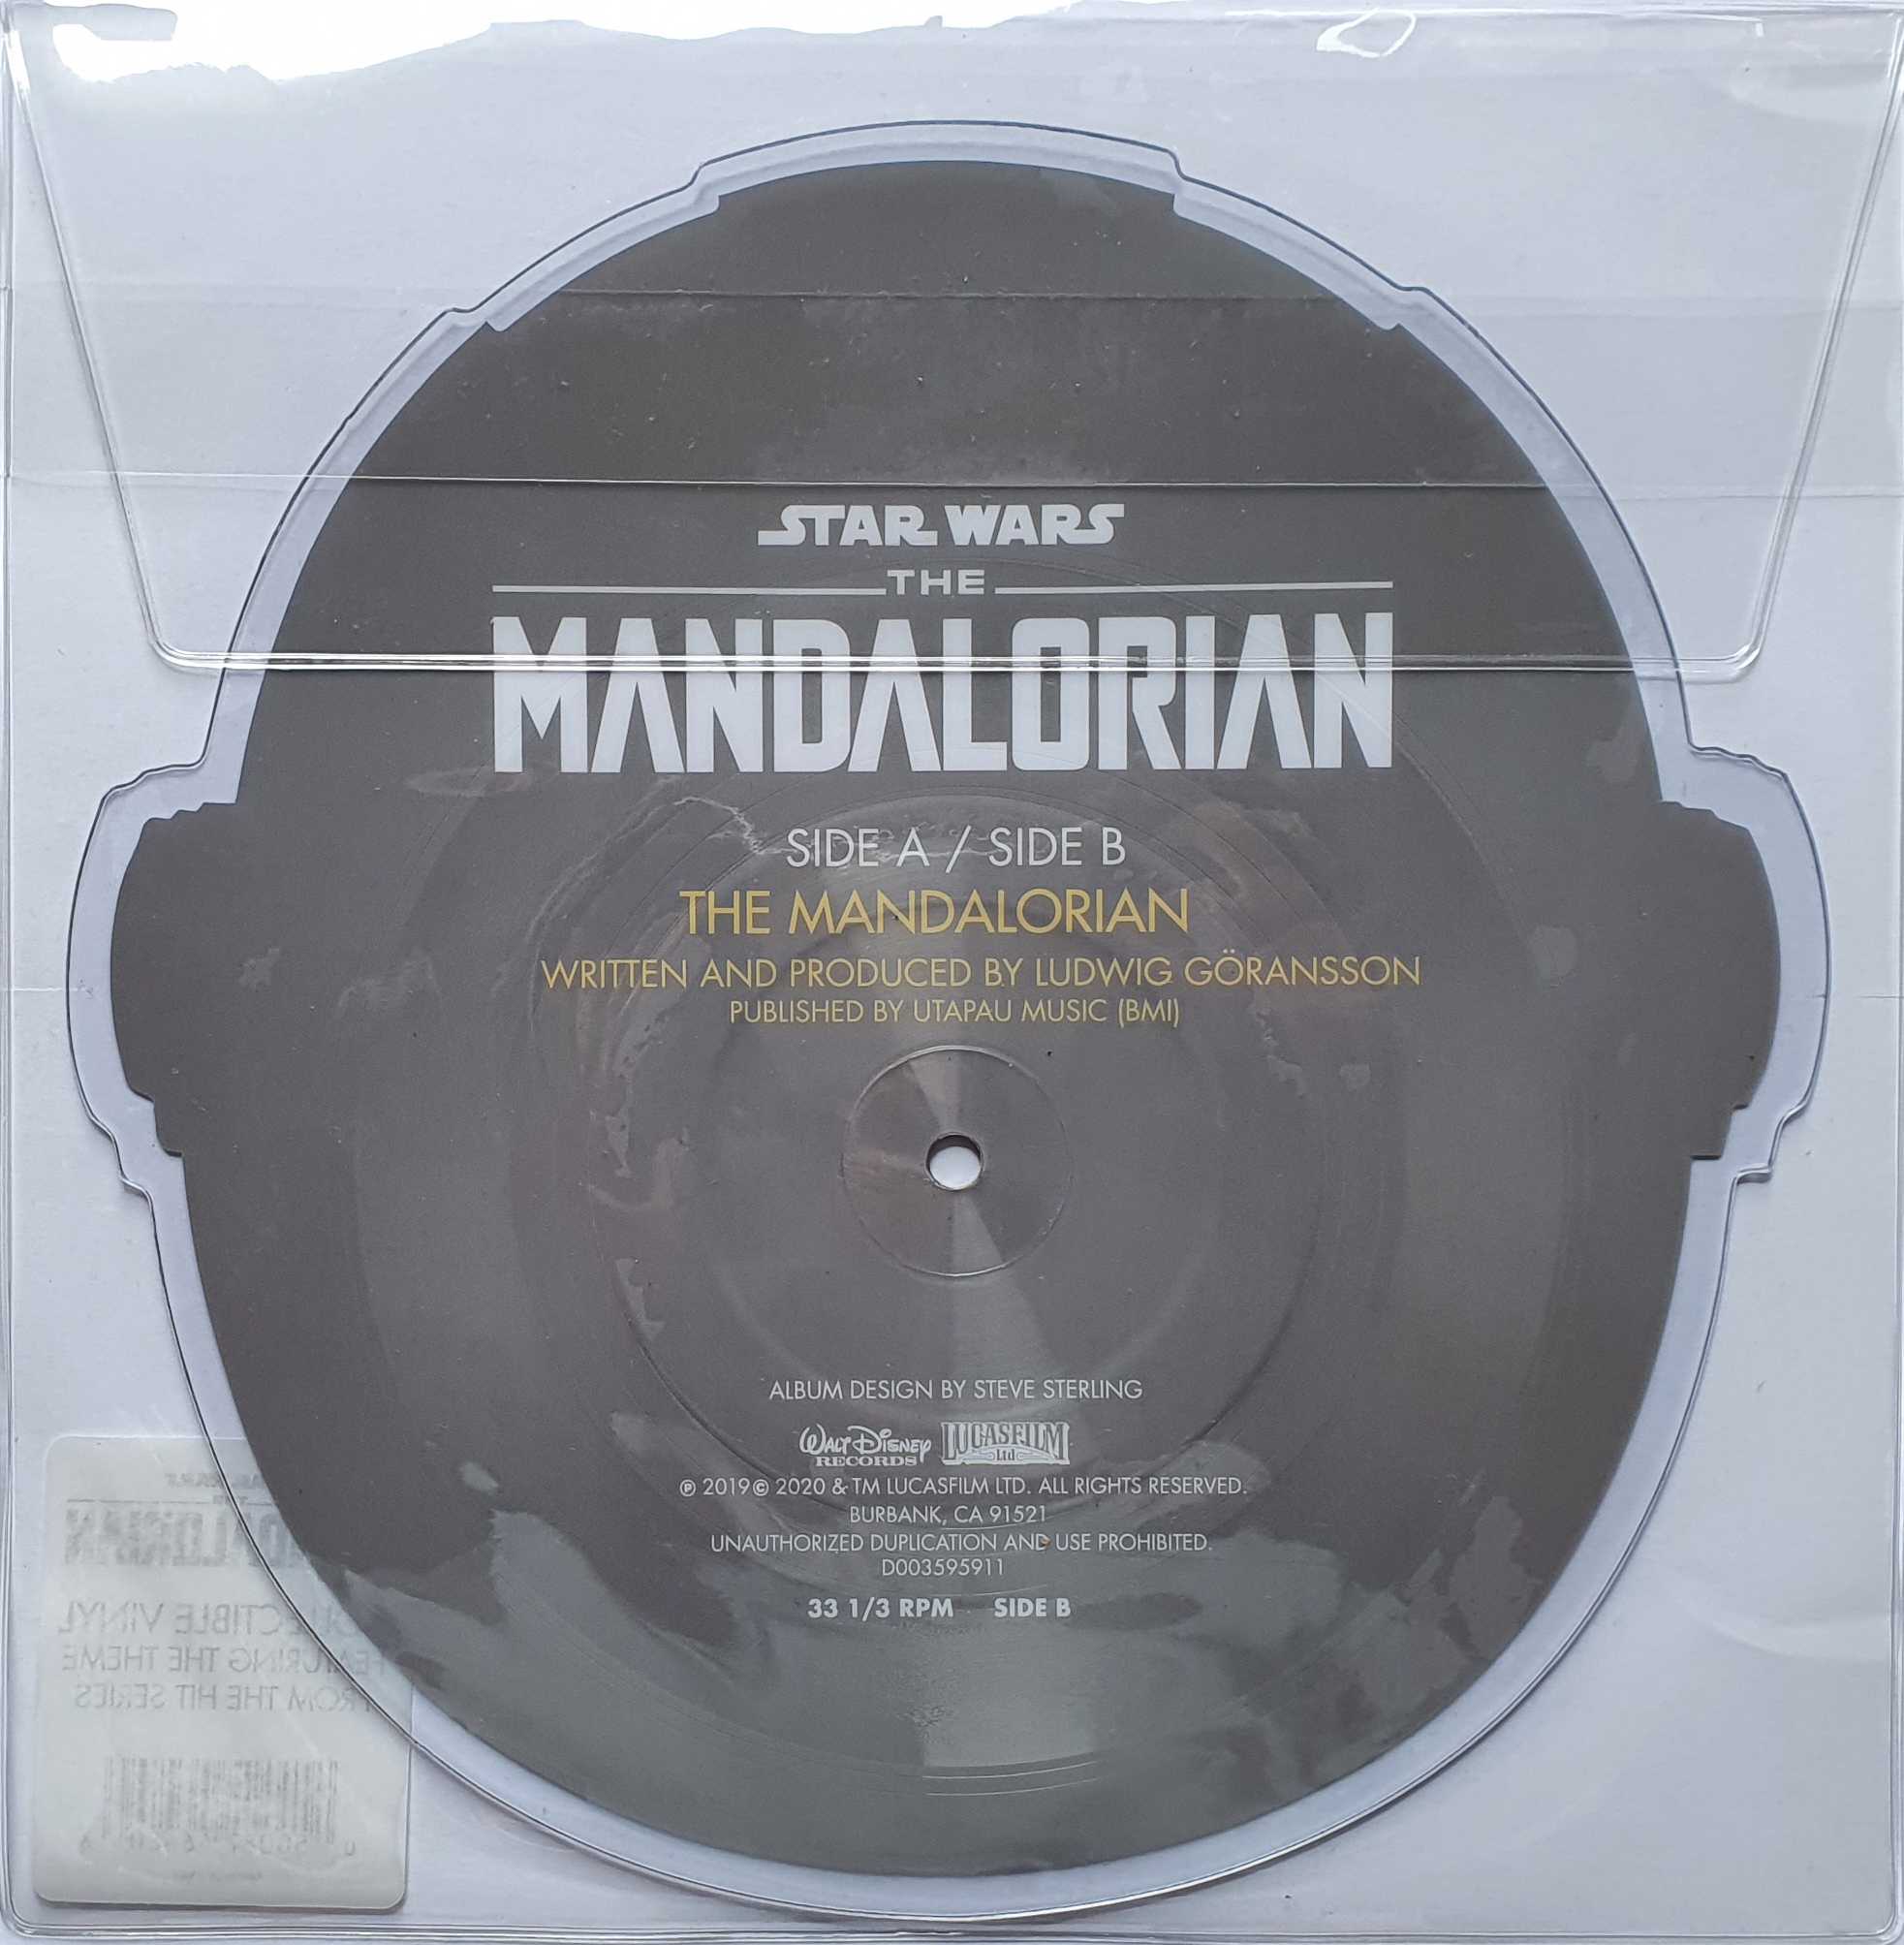 Picture of D003595911 Star Wars: The Mandalorian by artist Ludwig Goransson from ITV, Channel 4 and Channel 5 library